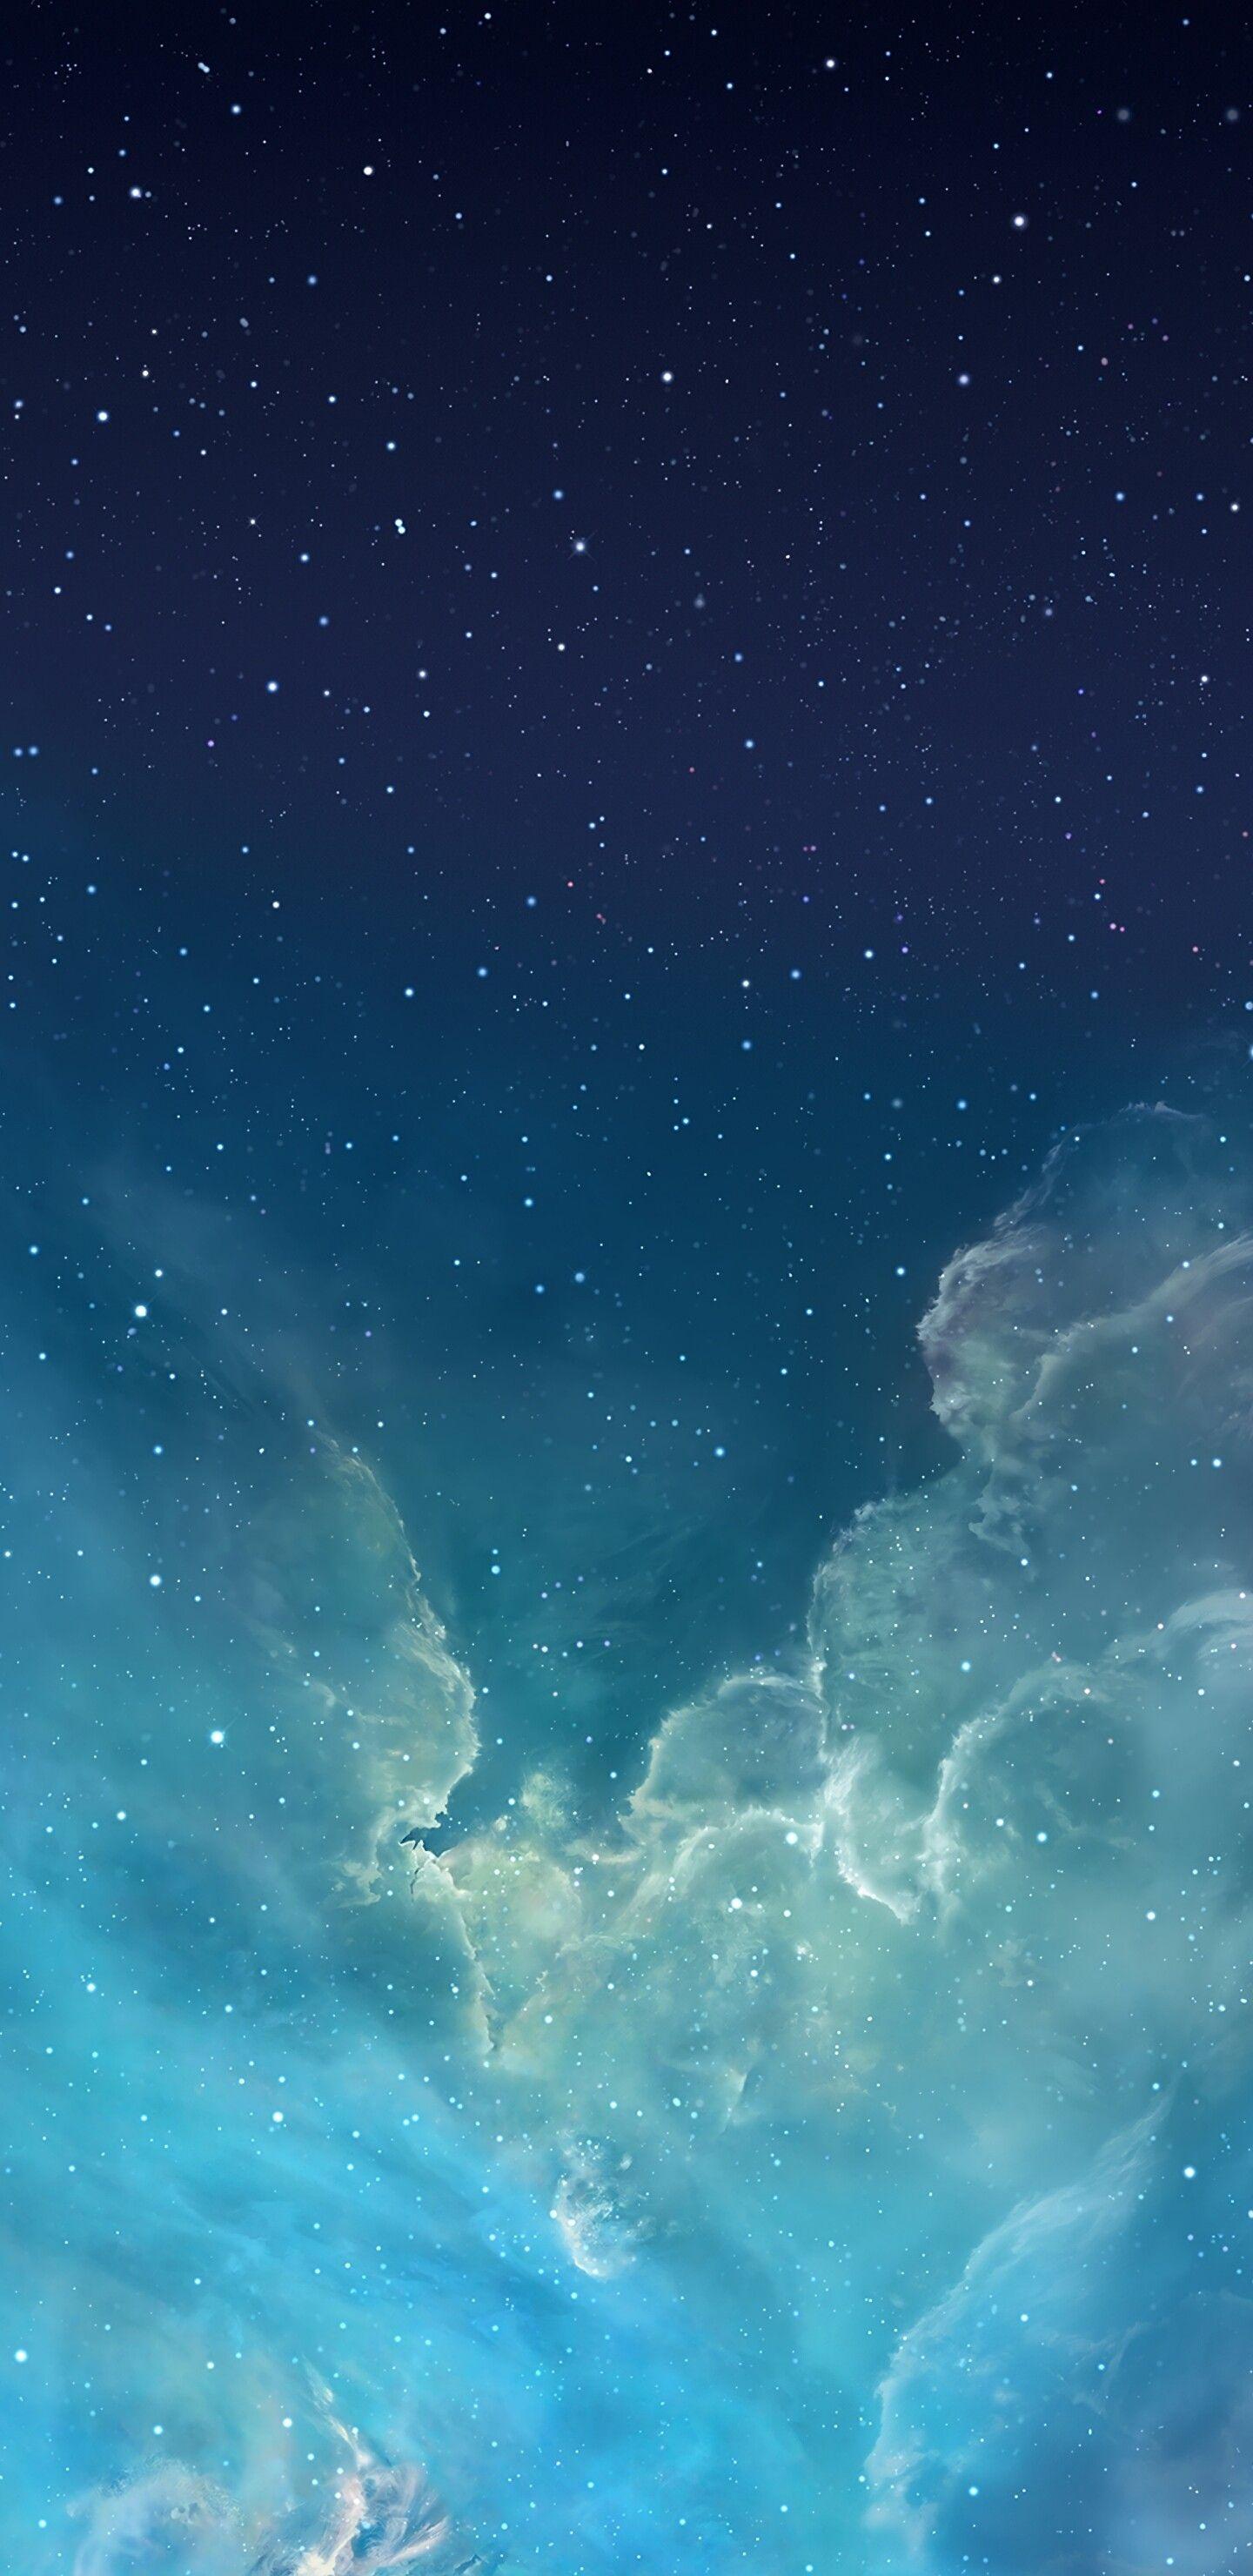 1440x2960 Wallpapers - Top Free